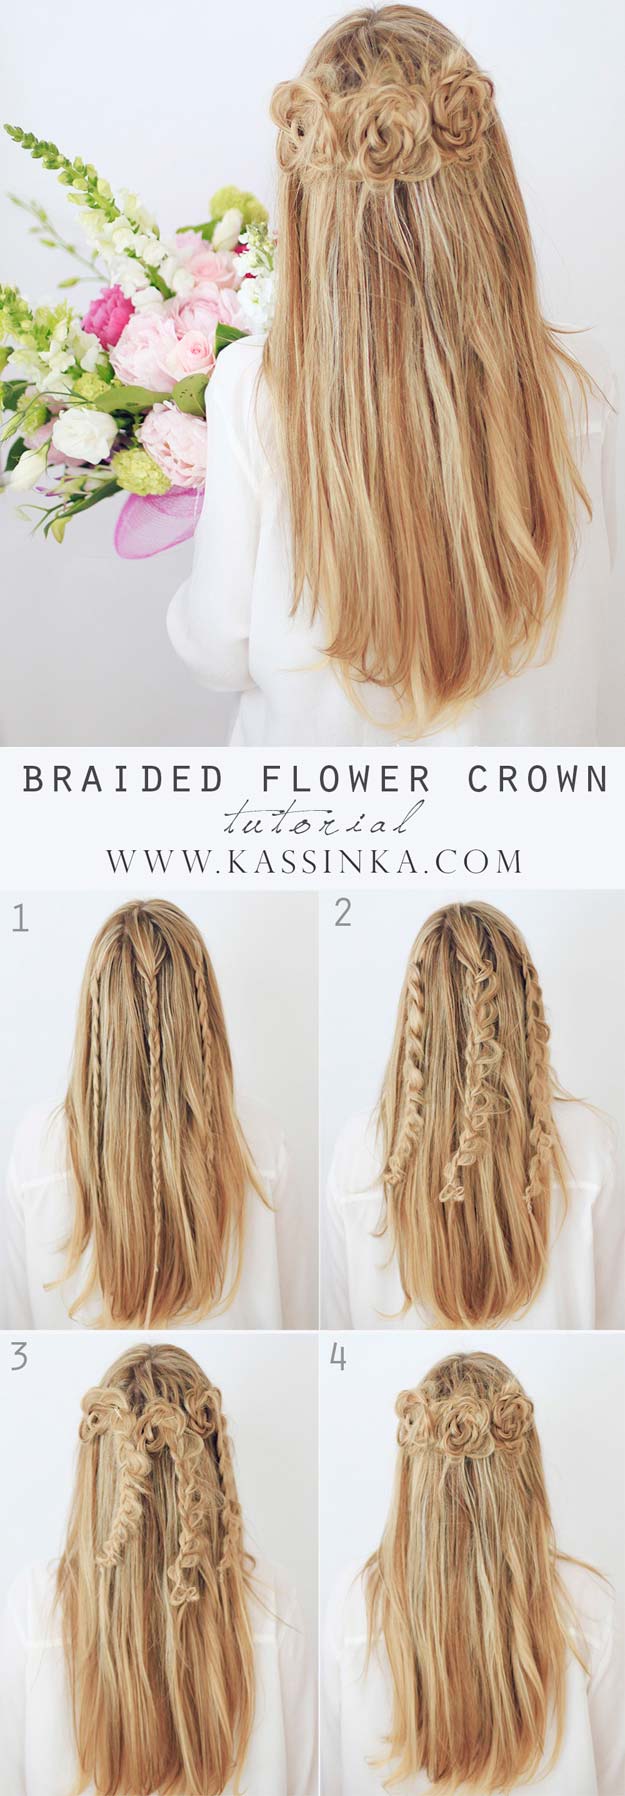 Best Hairstyles for Long Hair - Braided Flower Crown - Step by Step Tutorials for Easy Curls, Updo, Half Up, Braids and Lazy Girl Looks. Prom Ideas, Special Occasion Hair and Braiding Instructions for Teens, Teenagers and Adults, Women and Girls 